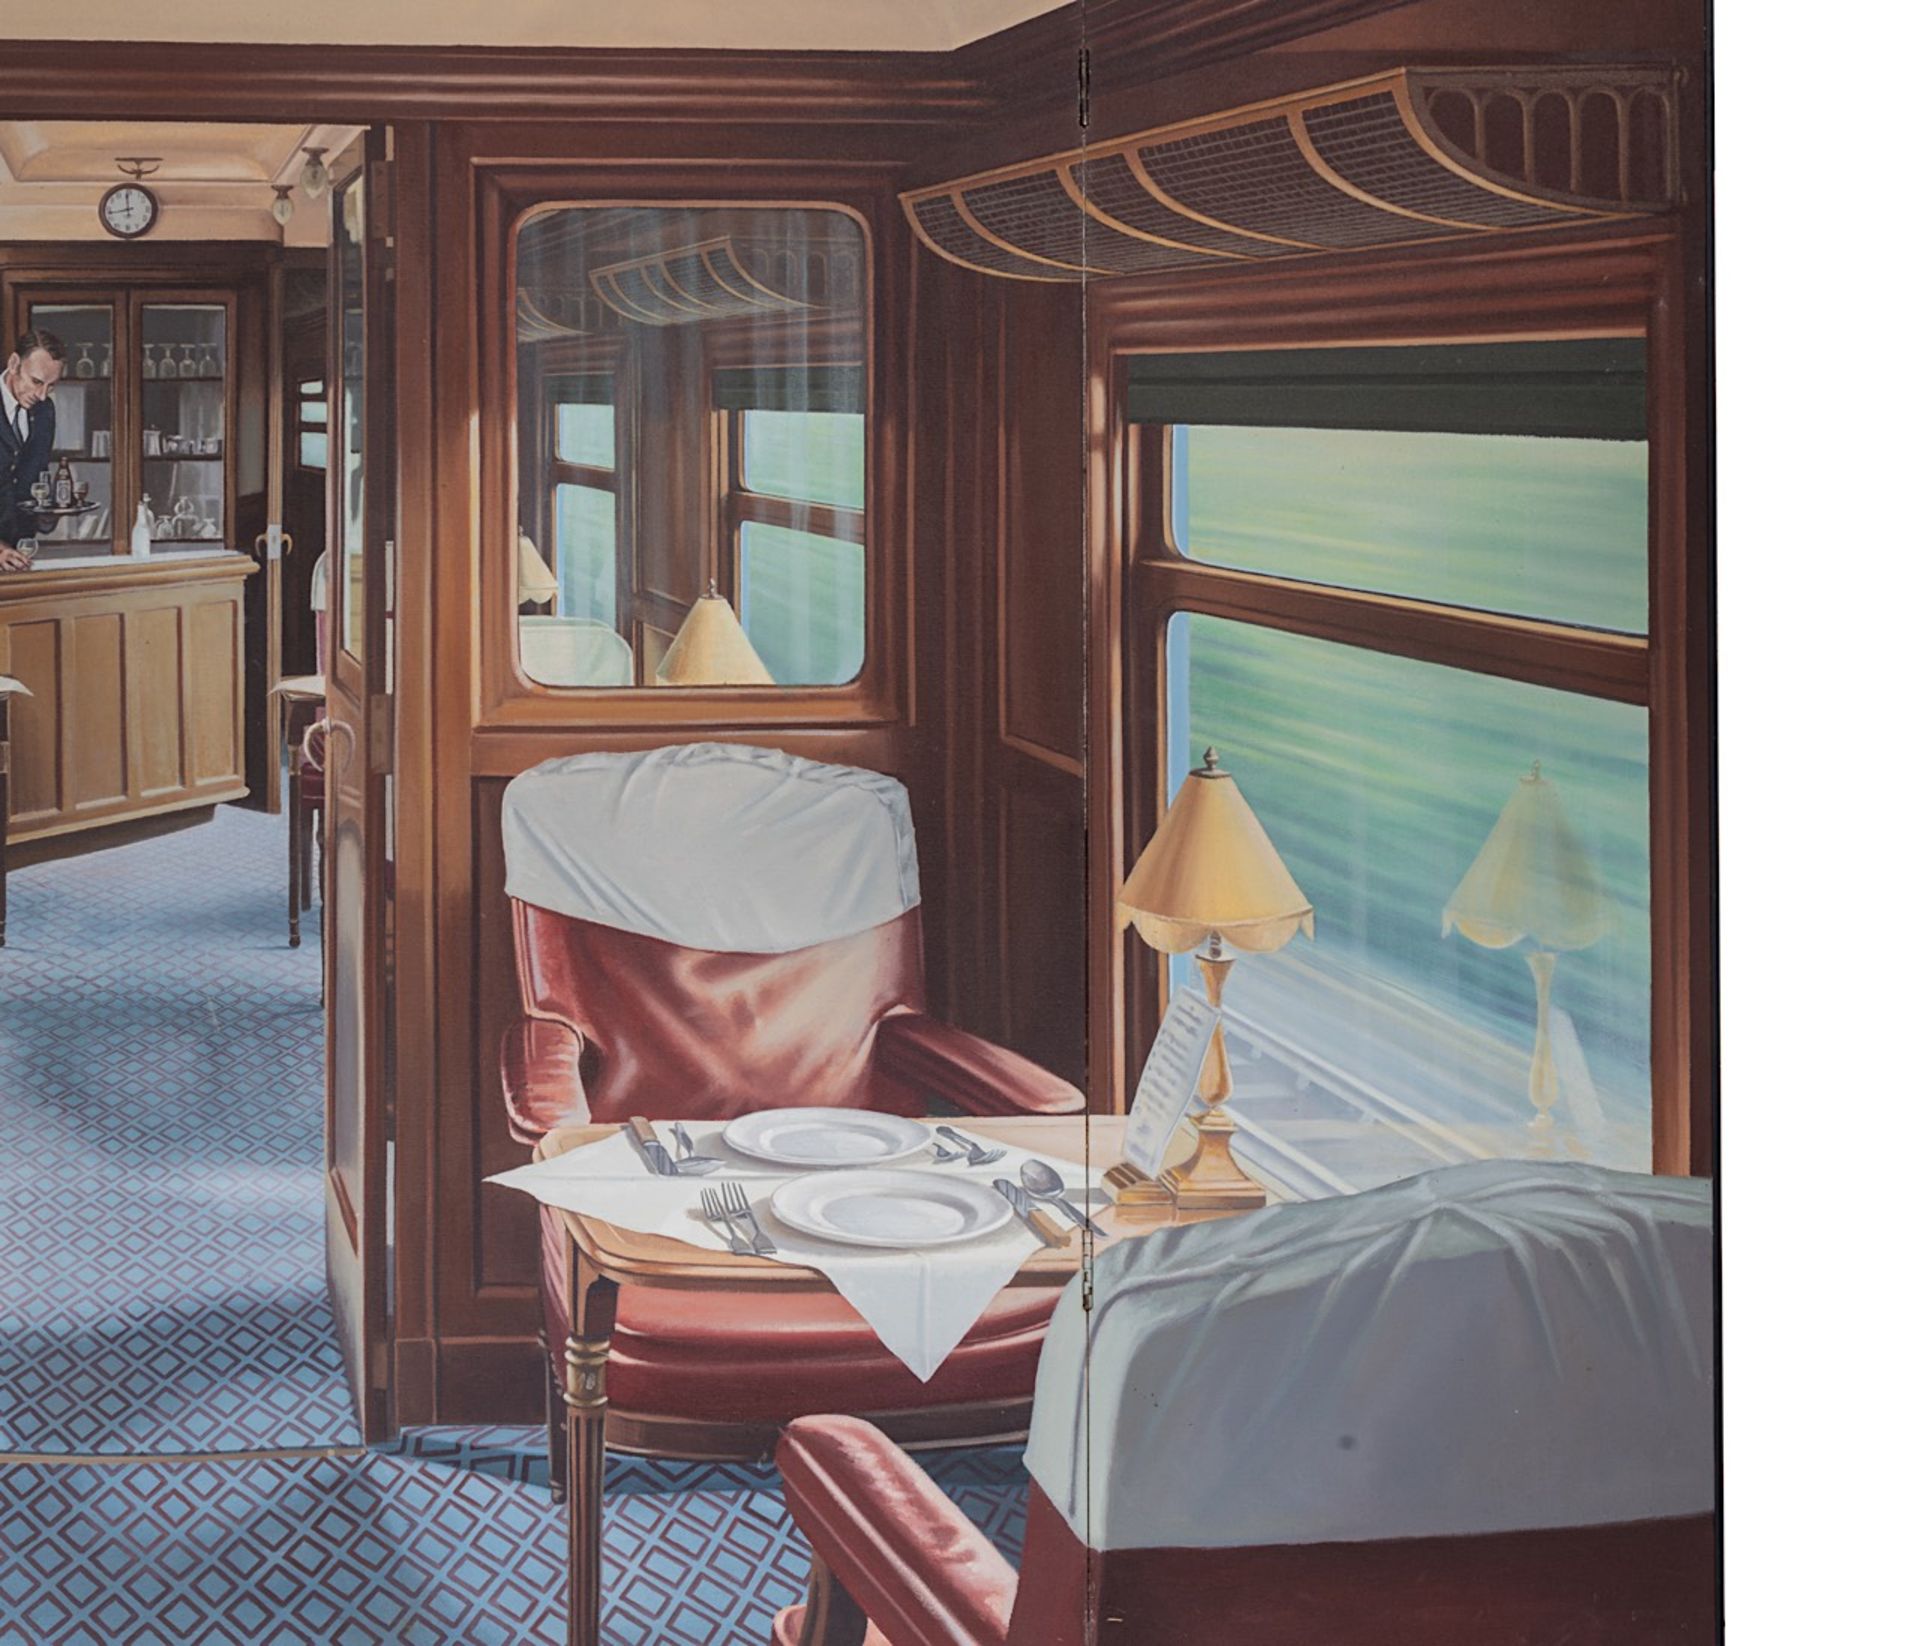 Giles Winter (1947), triptych of the interior of a train compartment, 1980, oil on canvas, 136 x 122 - Image 5 of 10